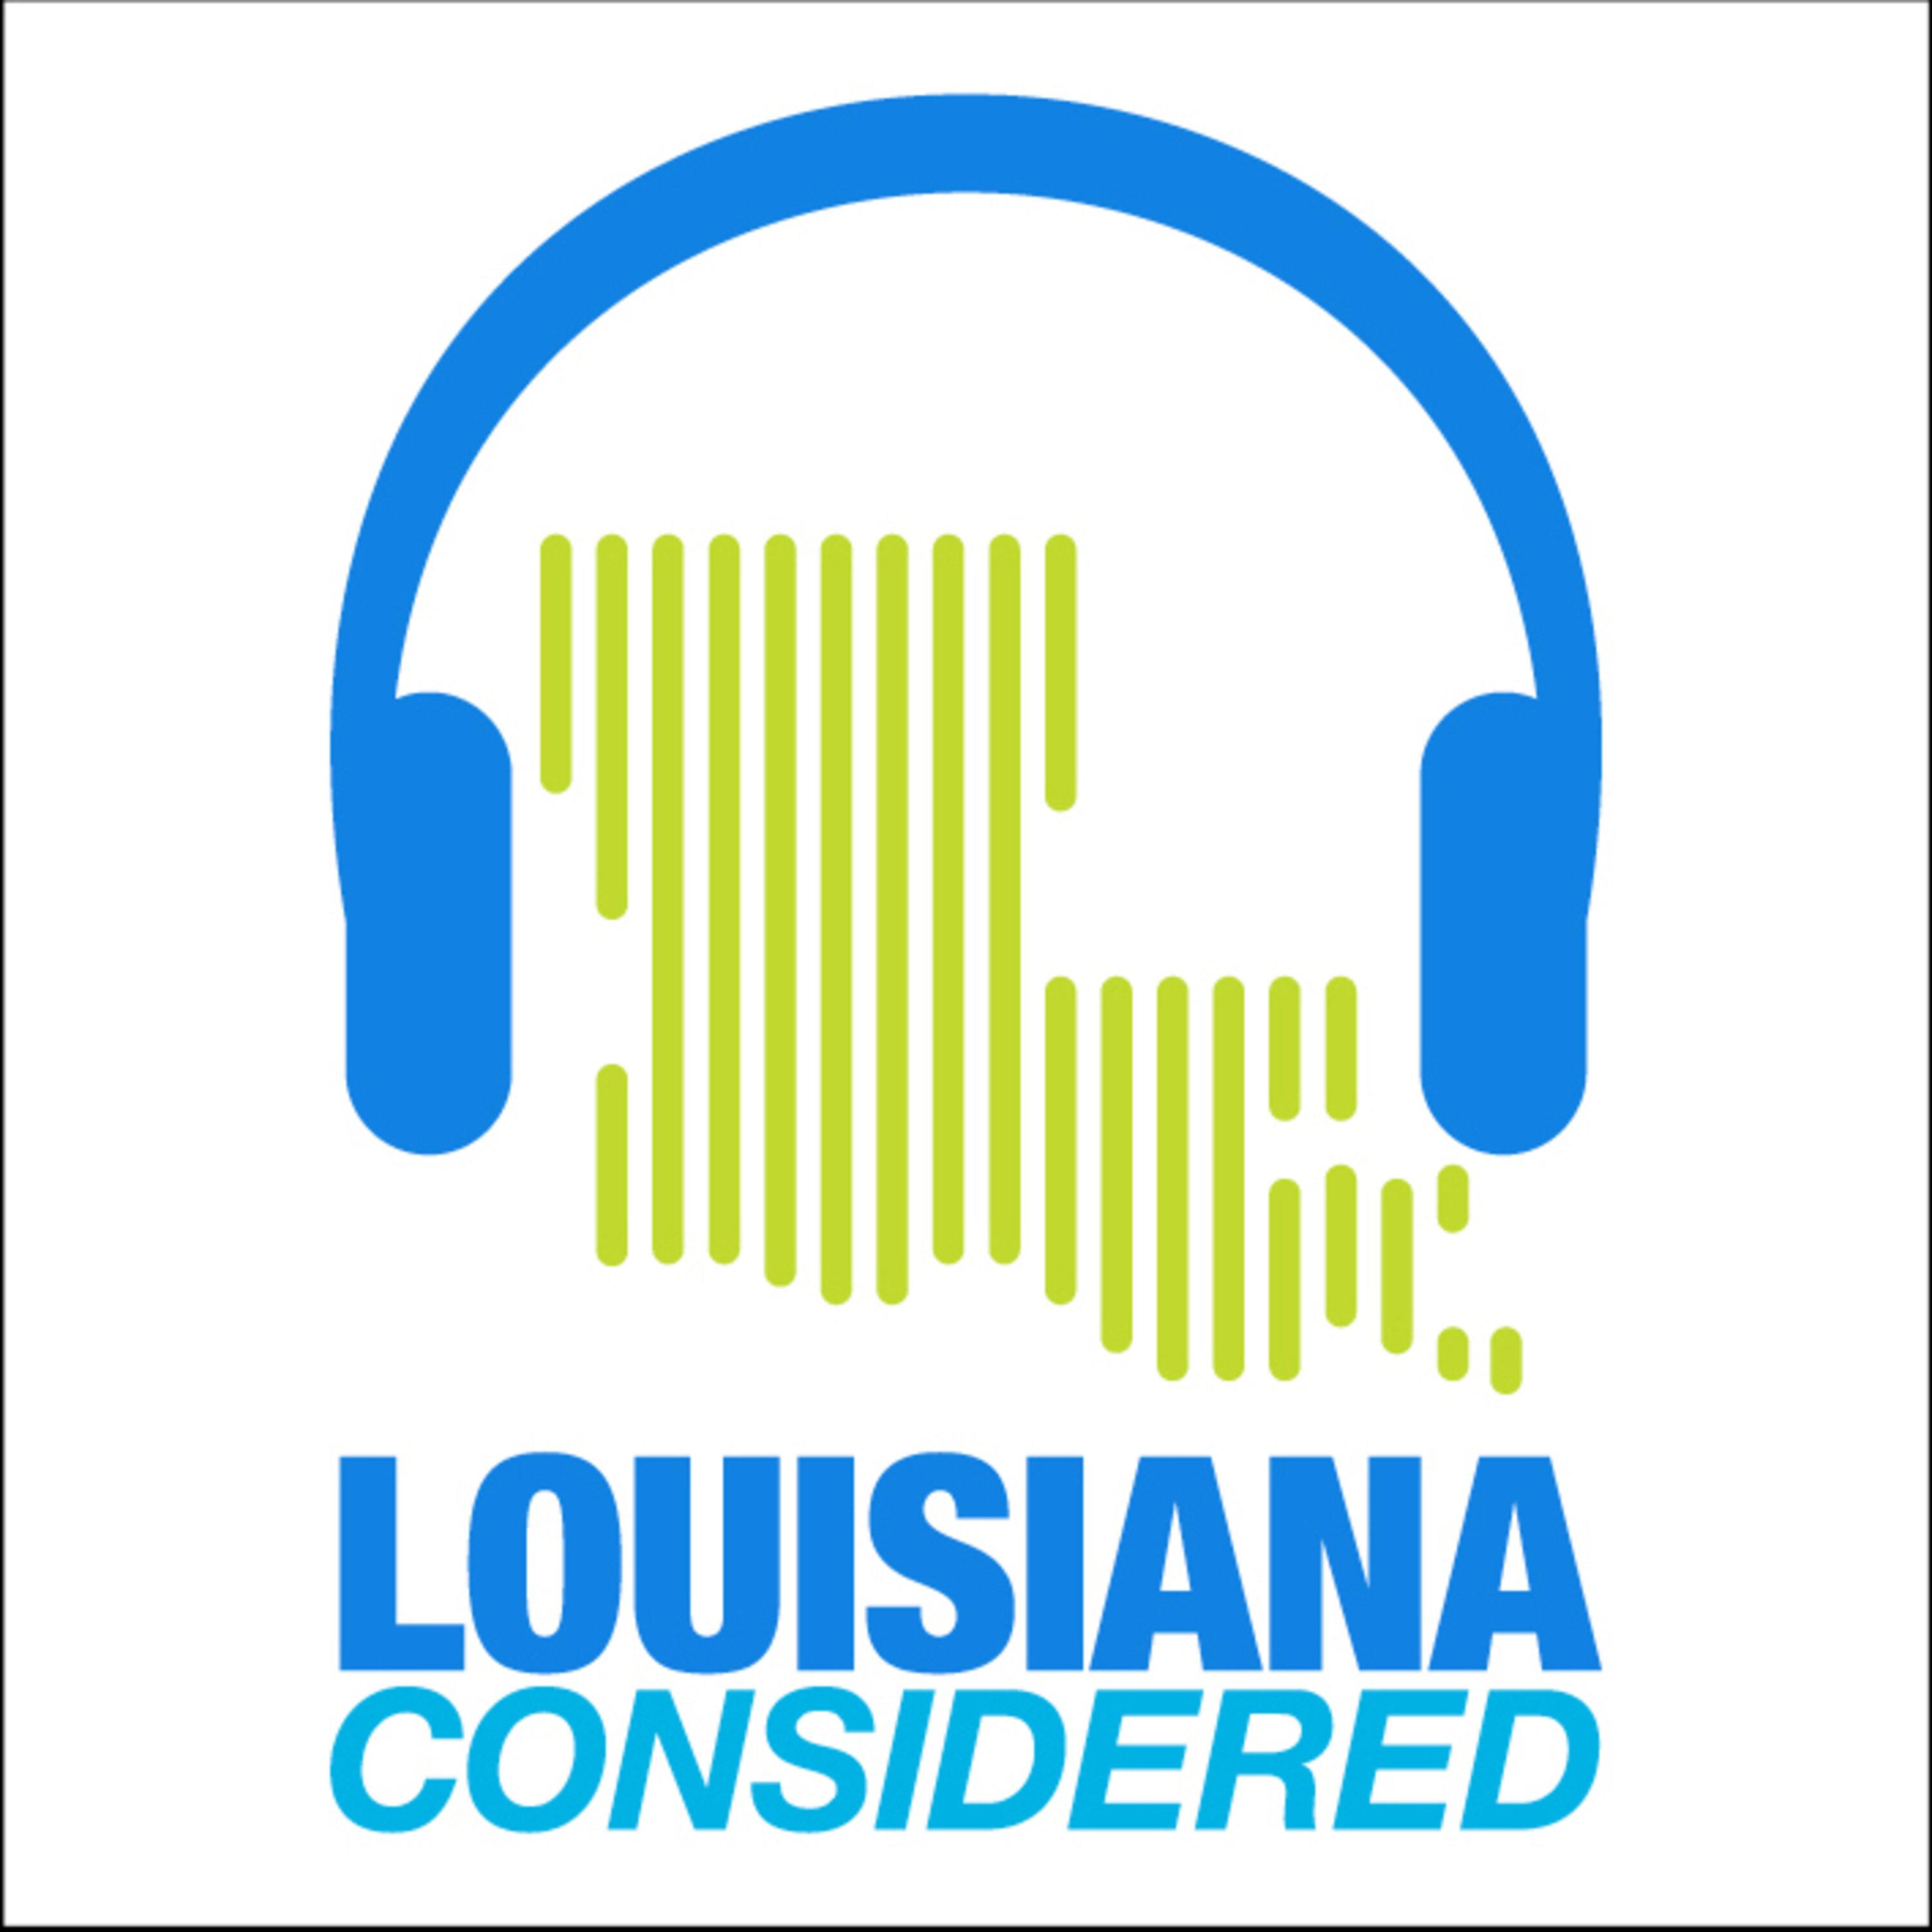 Thumbnail for "Louisiana Considered: Delta Variant Cases And Hospitalizations Break Records, Exploring The Deep Ties Between New Orleans And Haiti".